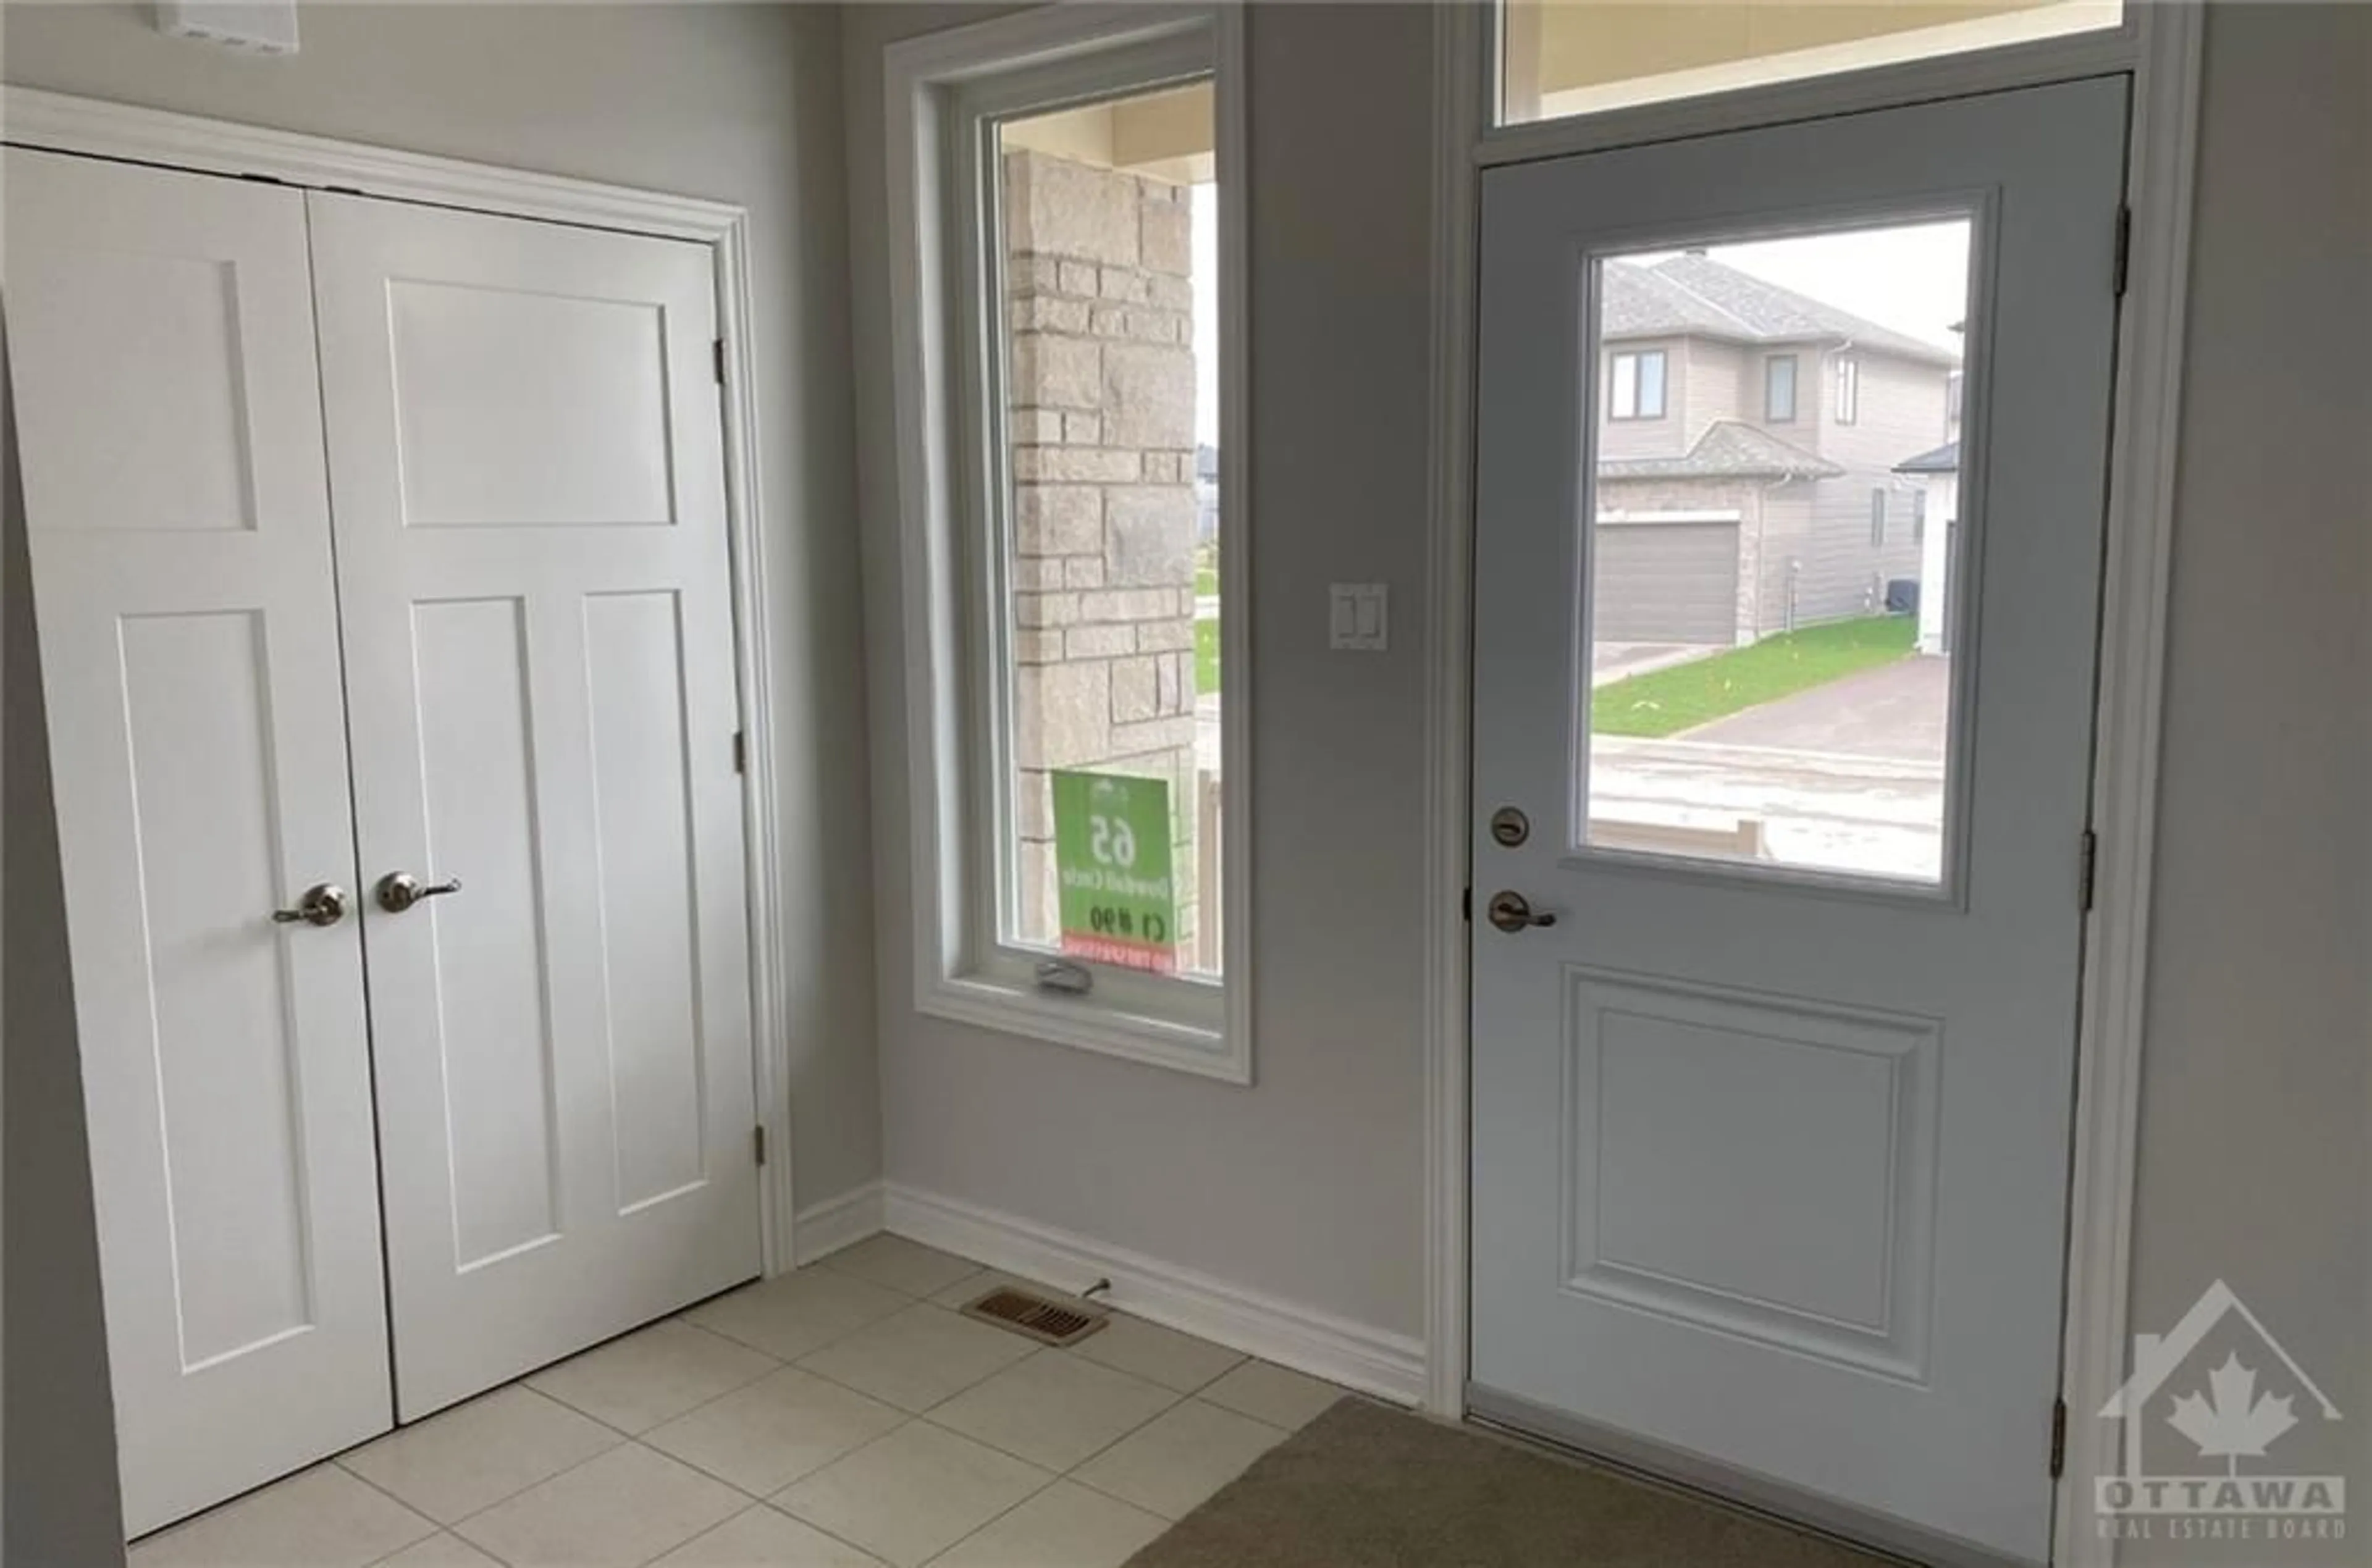 Indoor entryway for 65 DOWDALL Cir, Carleton Place Ontario K7C 0S3